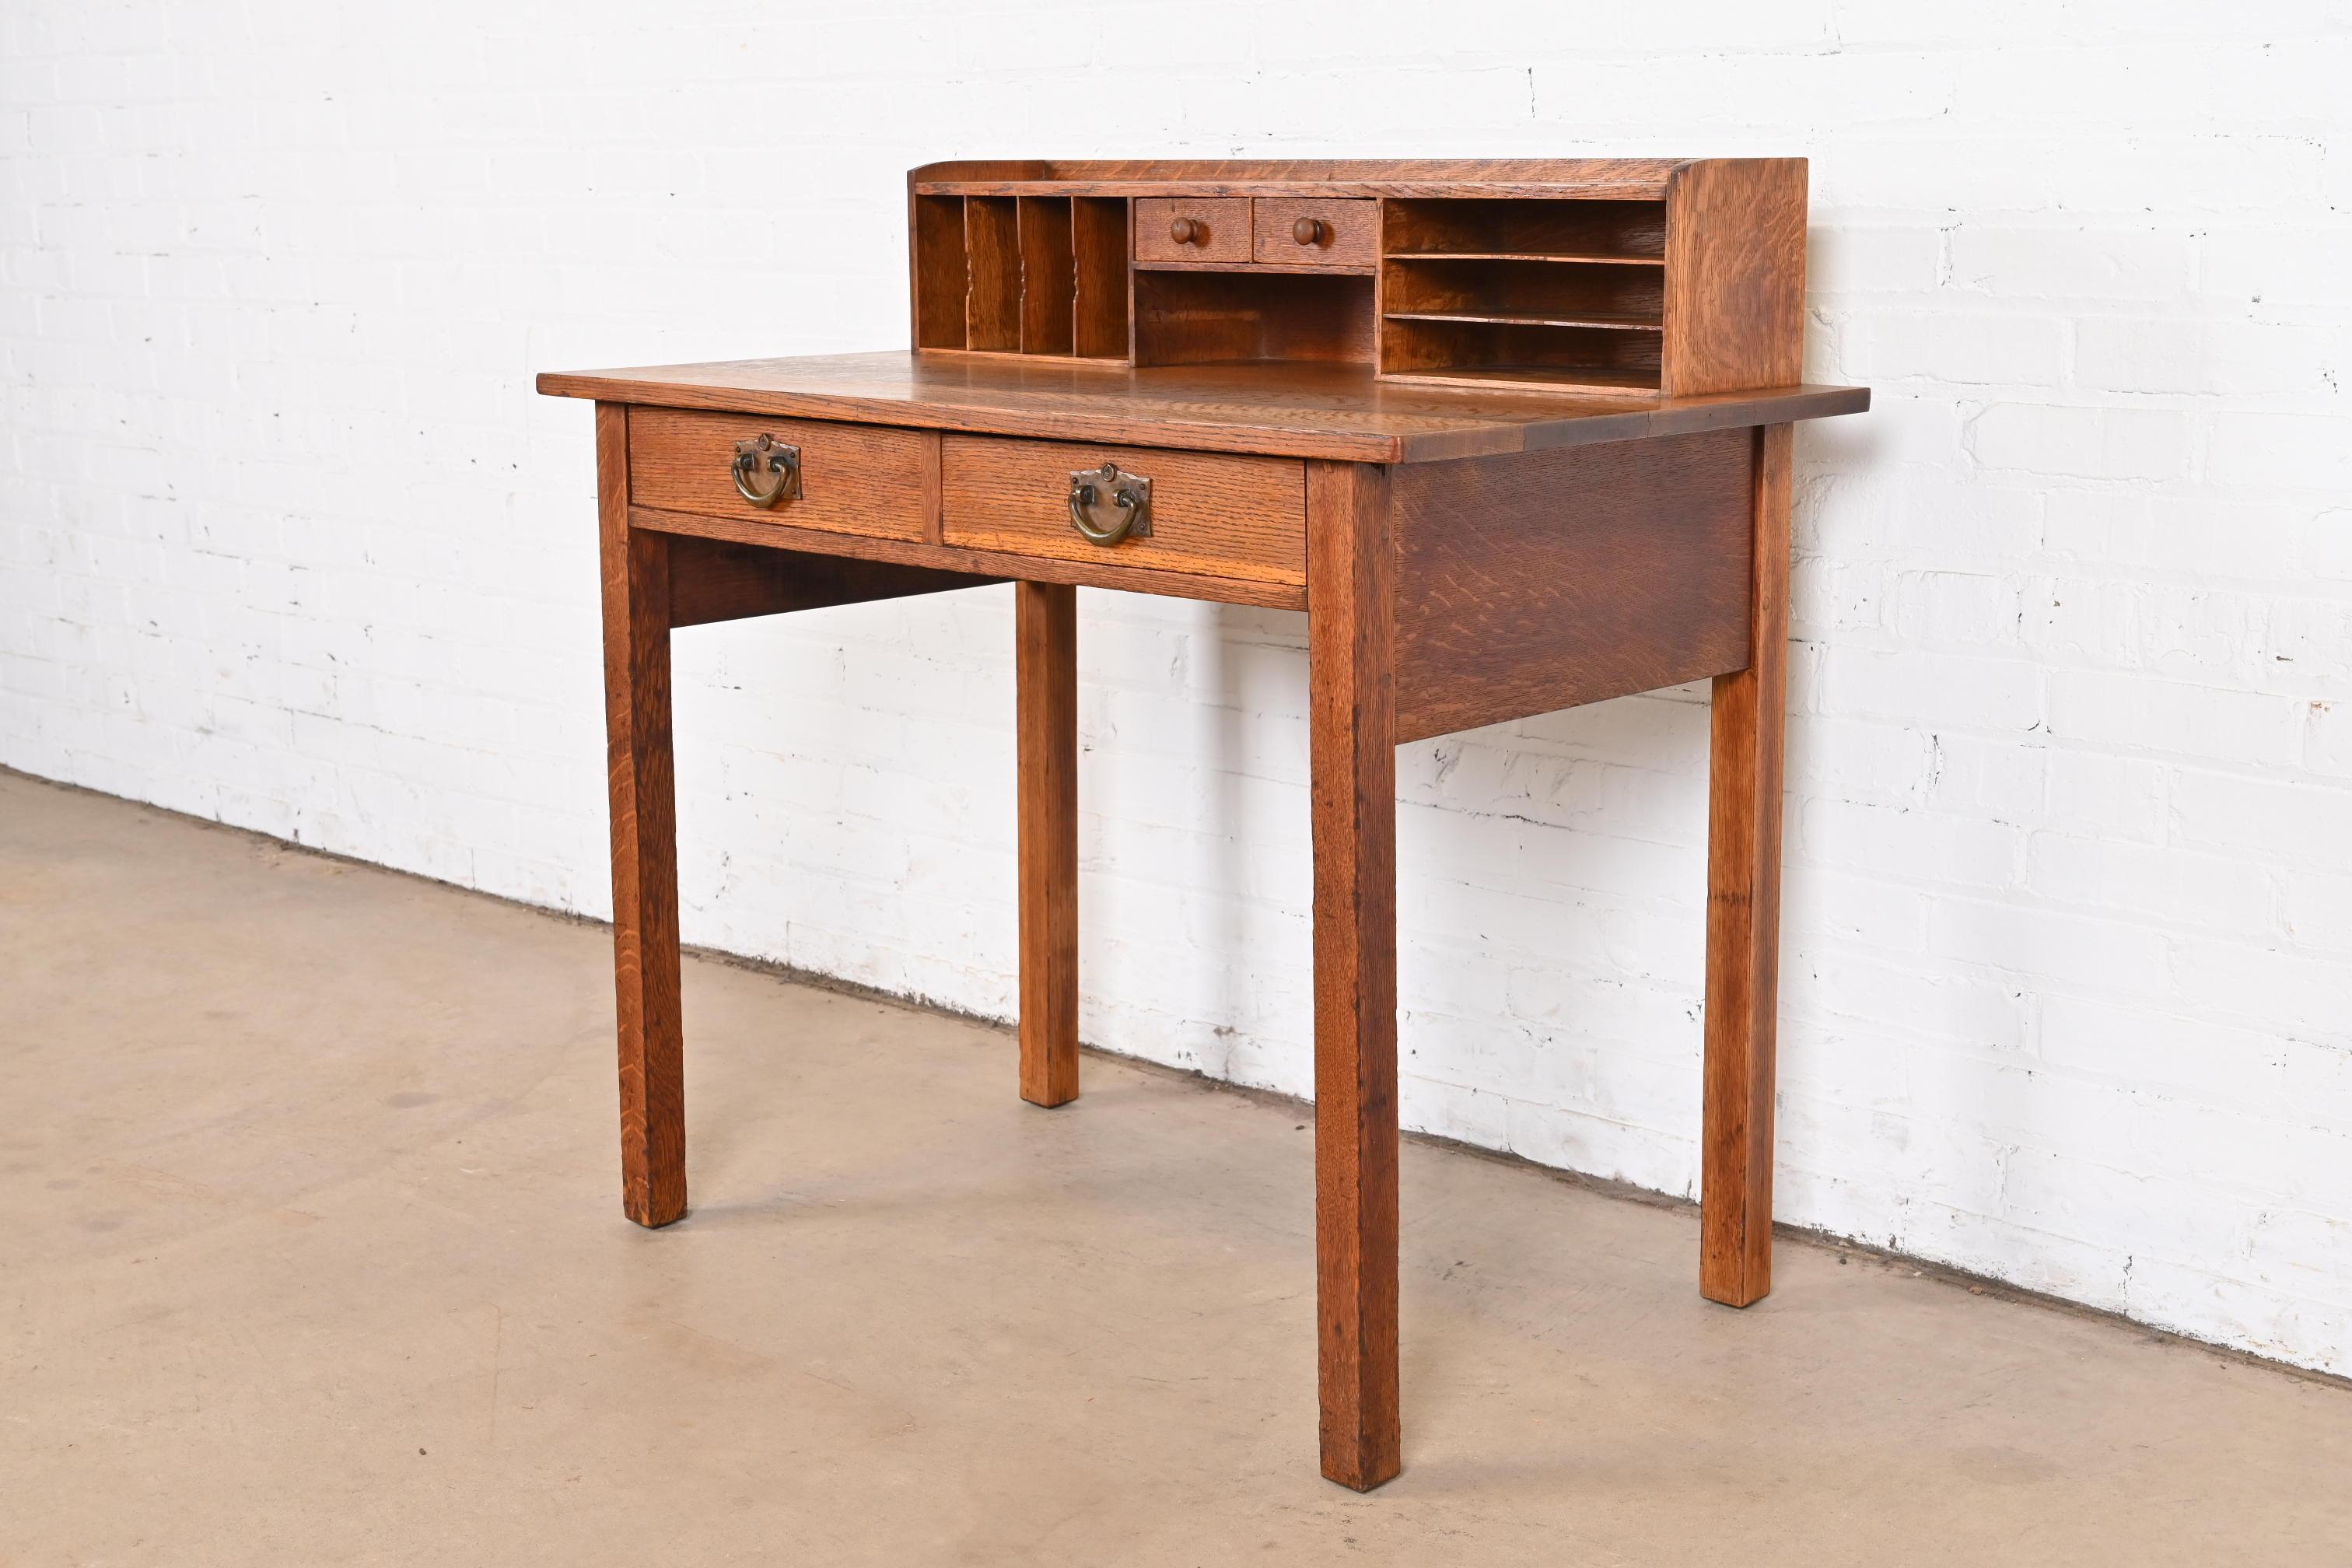 A rare and exceptional antique Mission oak Arts & Crafts writing desk

By Gustav Stickley (signed with branded mark and paper label)

USA, Early 20th Century

Solid quarter sawn oak, with original hammered copper hardware.

Measures: 38